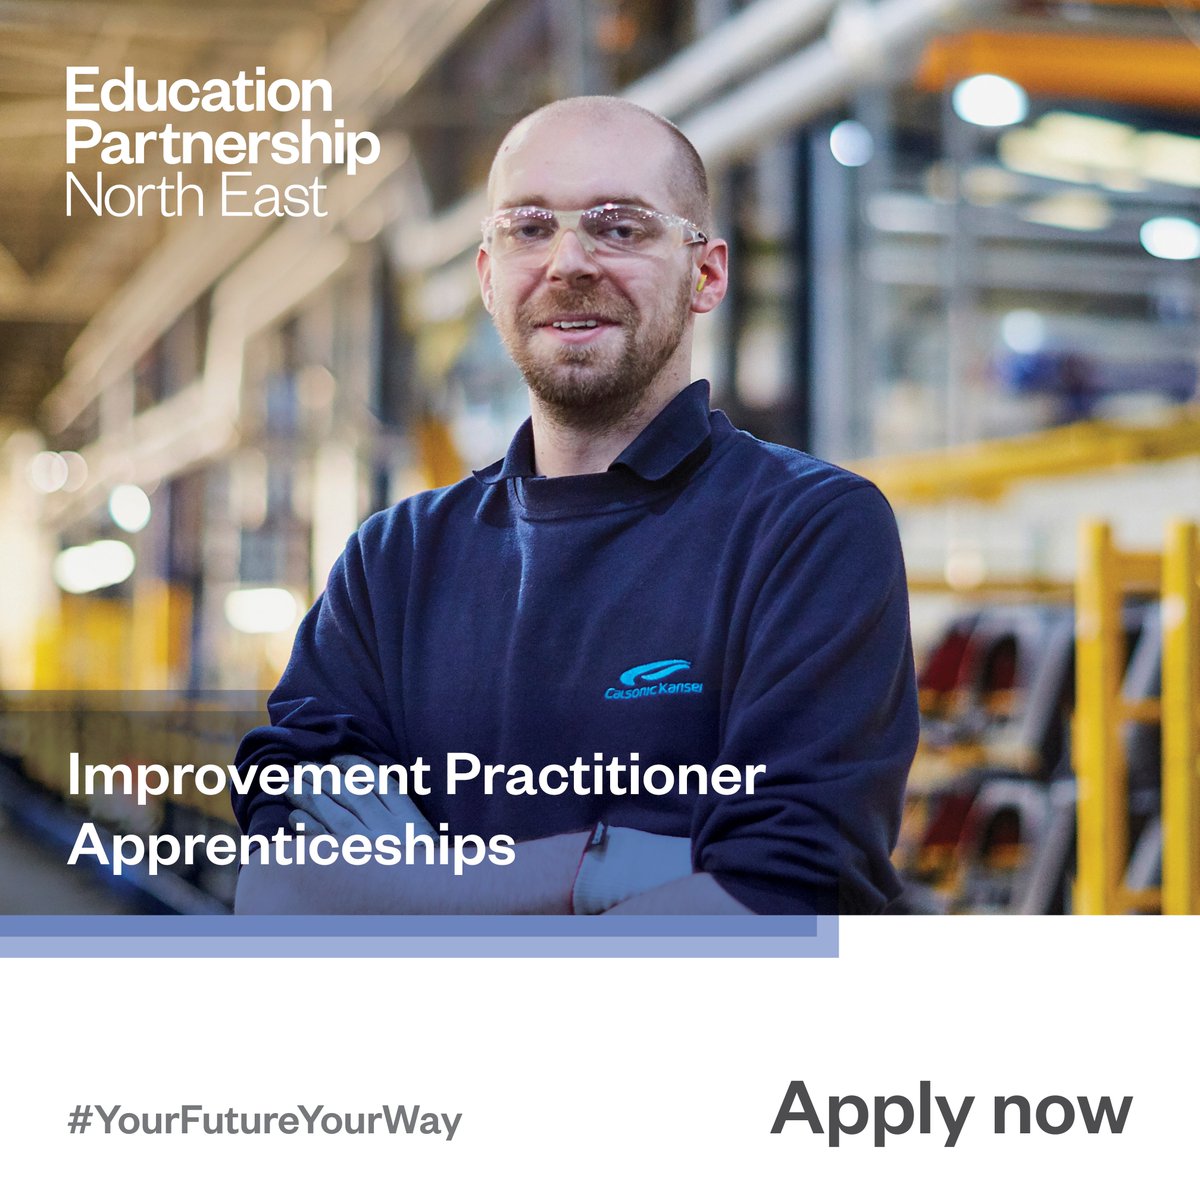 Improvement Practitioner apprentices have the knowledge & understanding of compliance, decision-making, project management, change management, process mapping & data analysis. ✅ Get in touch for more information ➡️ francesca.regan@sunderlandcollege.ac.uk